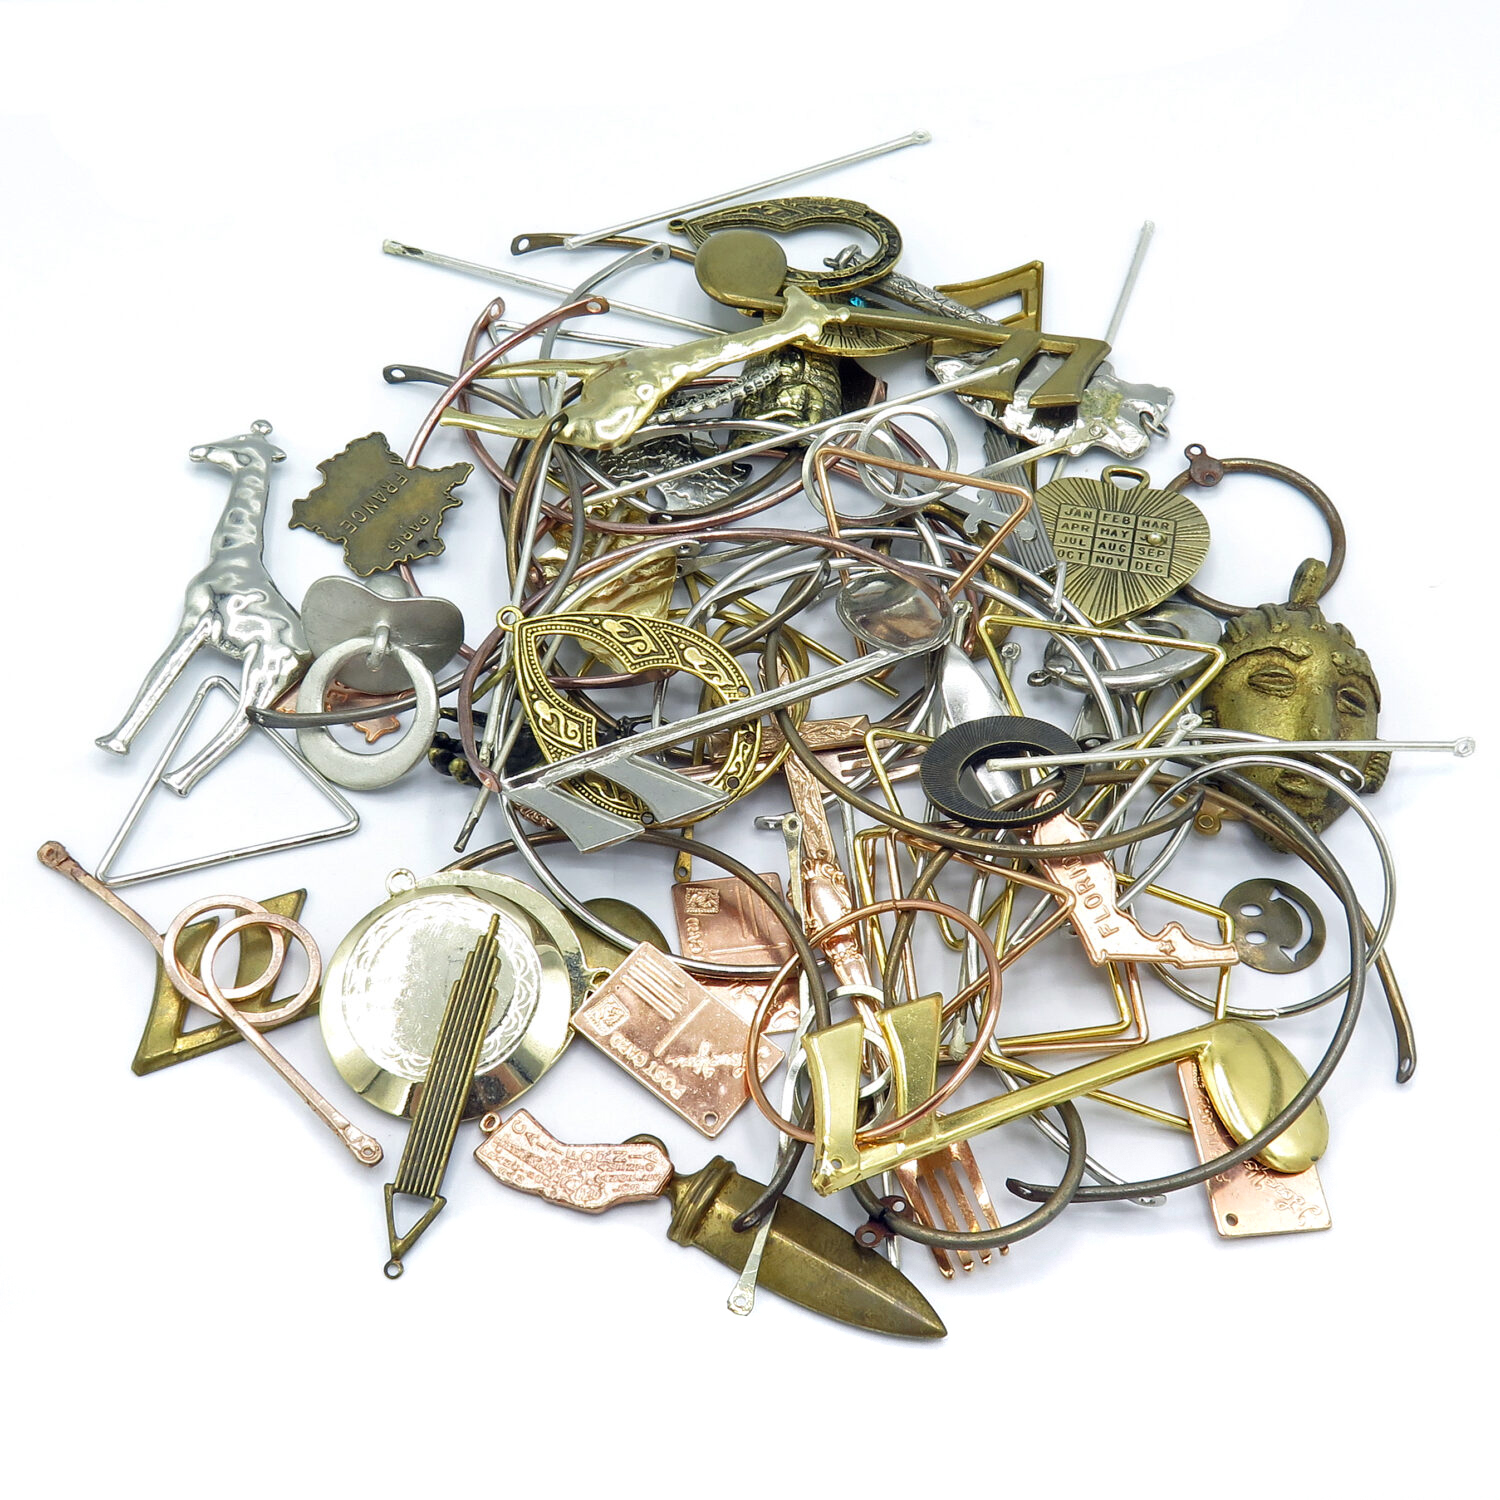 Bulk Wholesale Lot of Metal Charms & Metal Findings and Components ~ 1/2 Pound